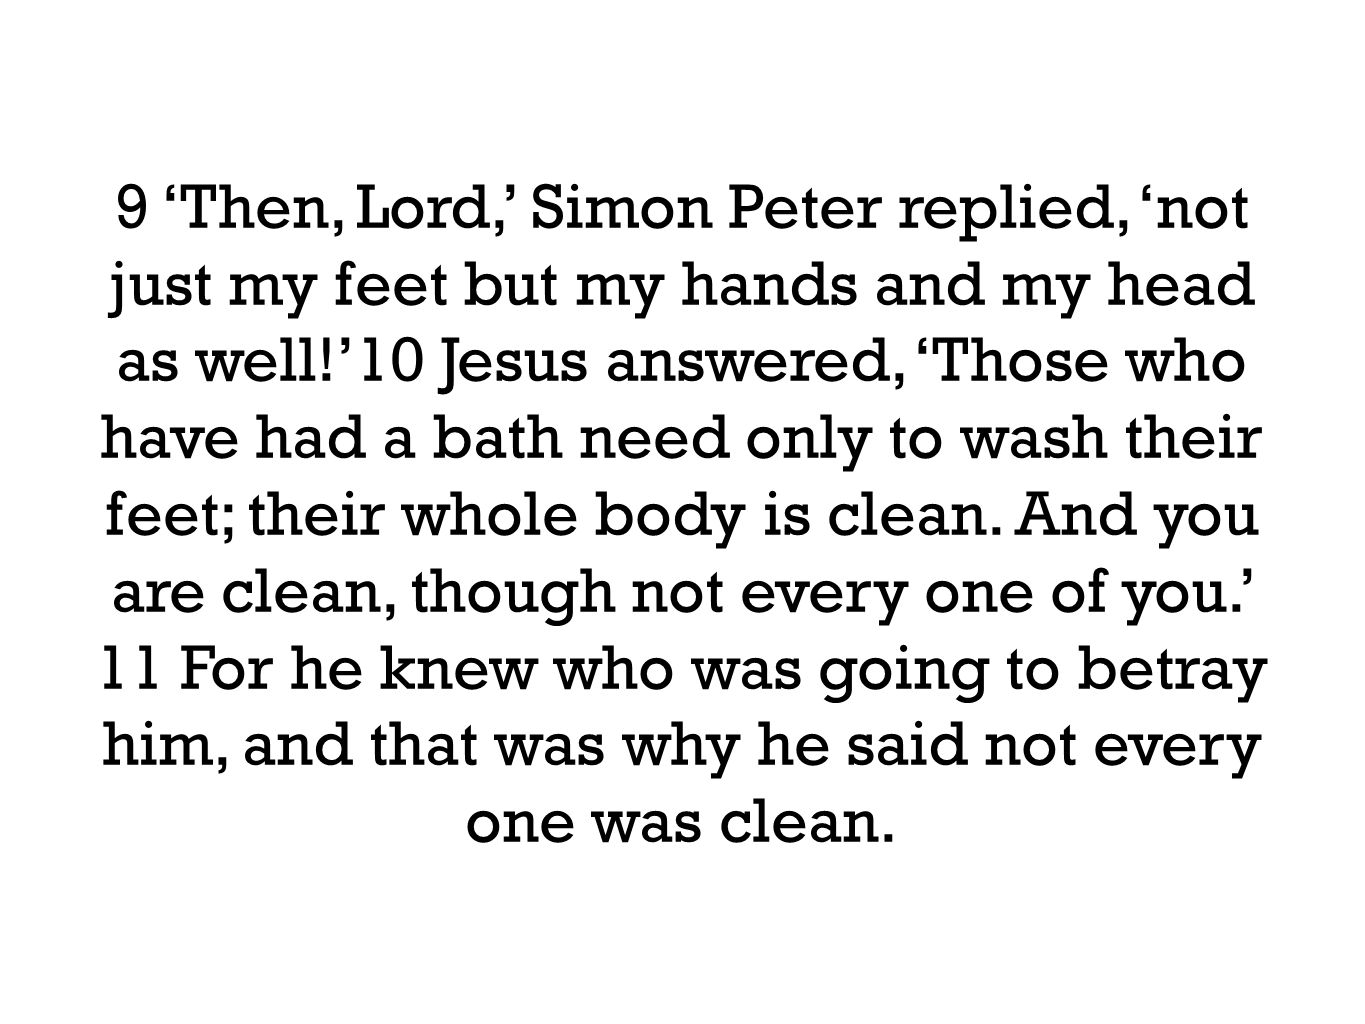 9 ‘Then, Lord,’ Simon Peter replied, ‘not just my feet but my hands and my head as well!’10 Jesus answered, ‘Those who have had a bath need only to wash their feet; their whole body is clean.